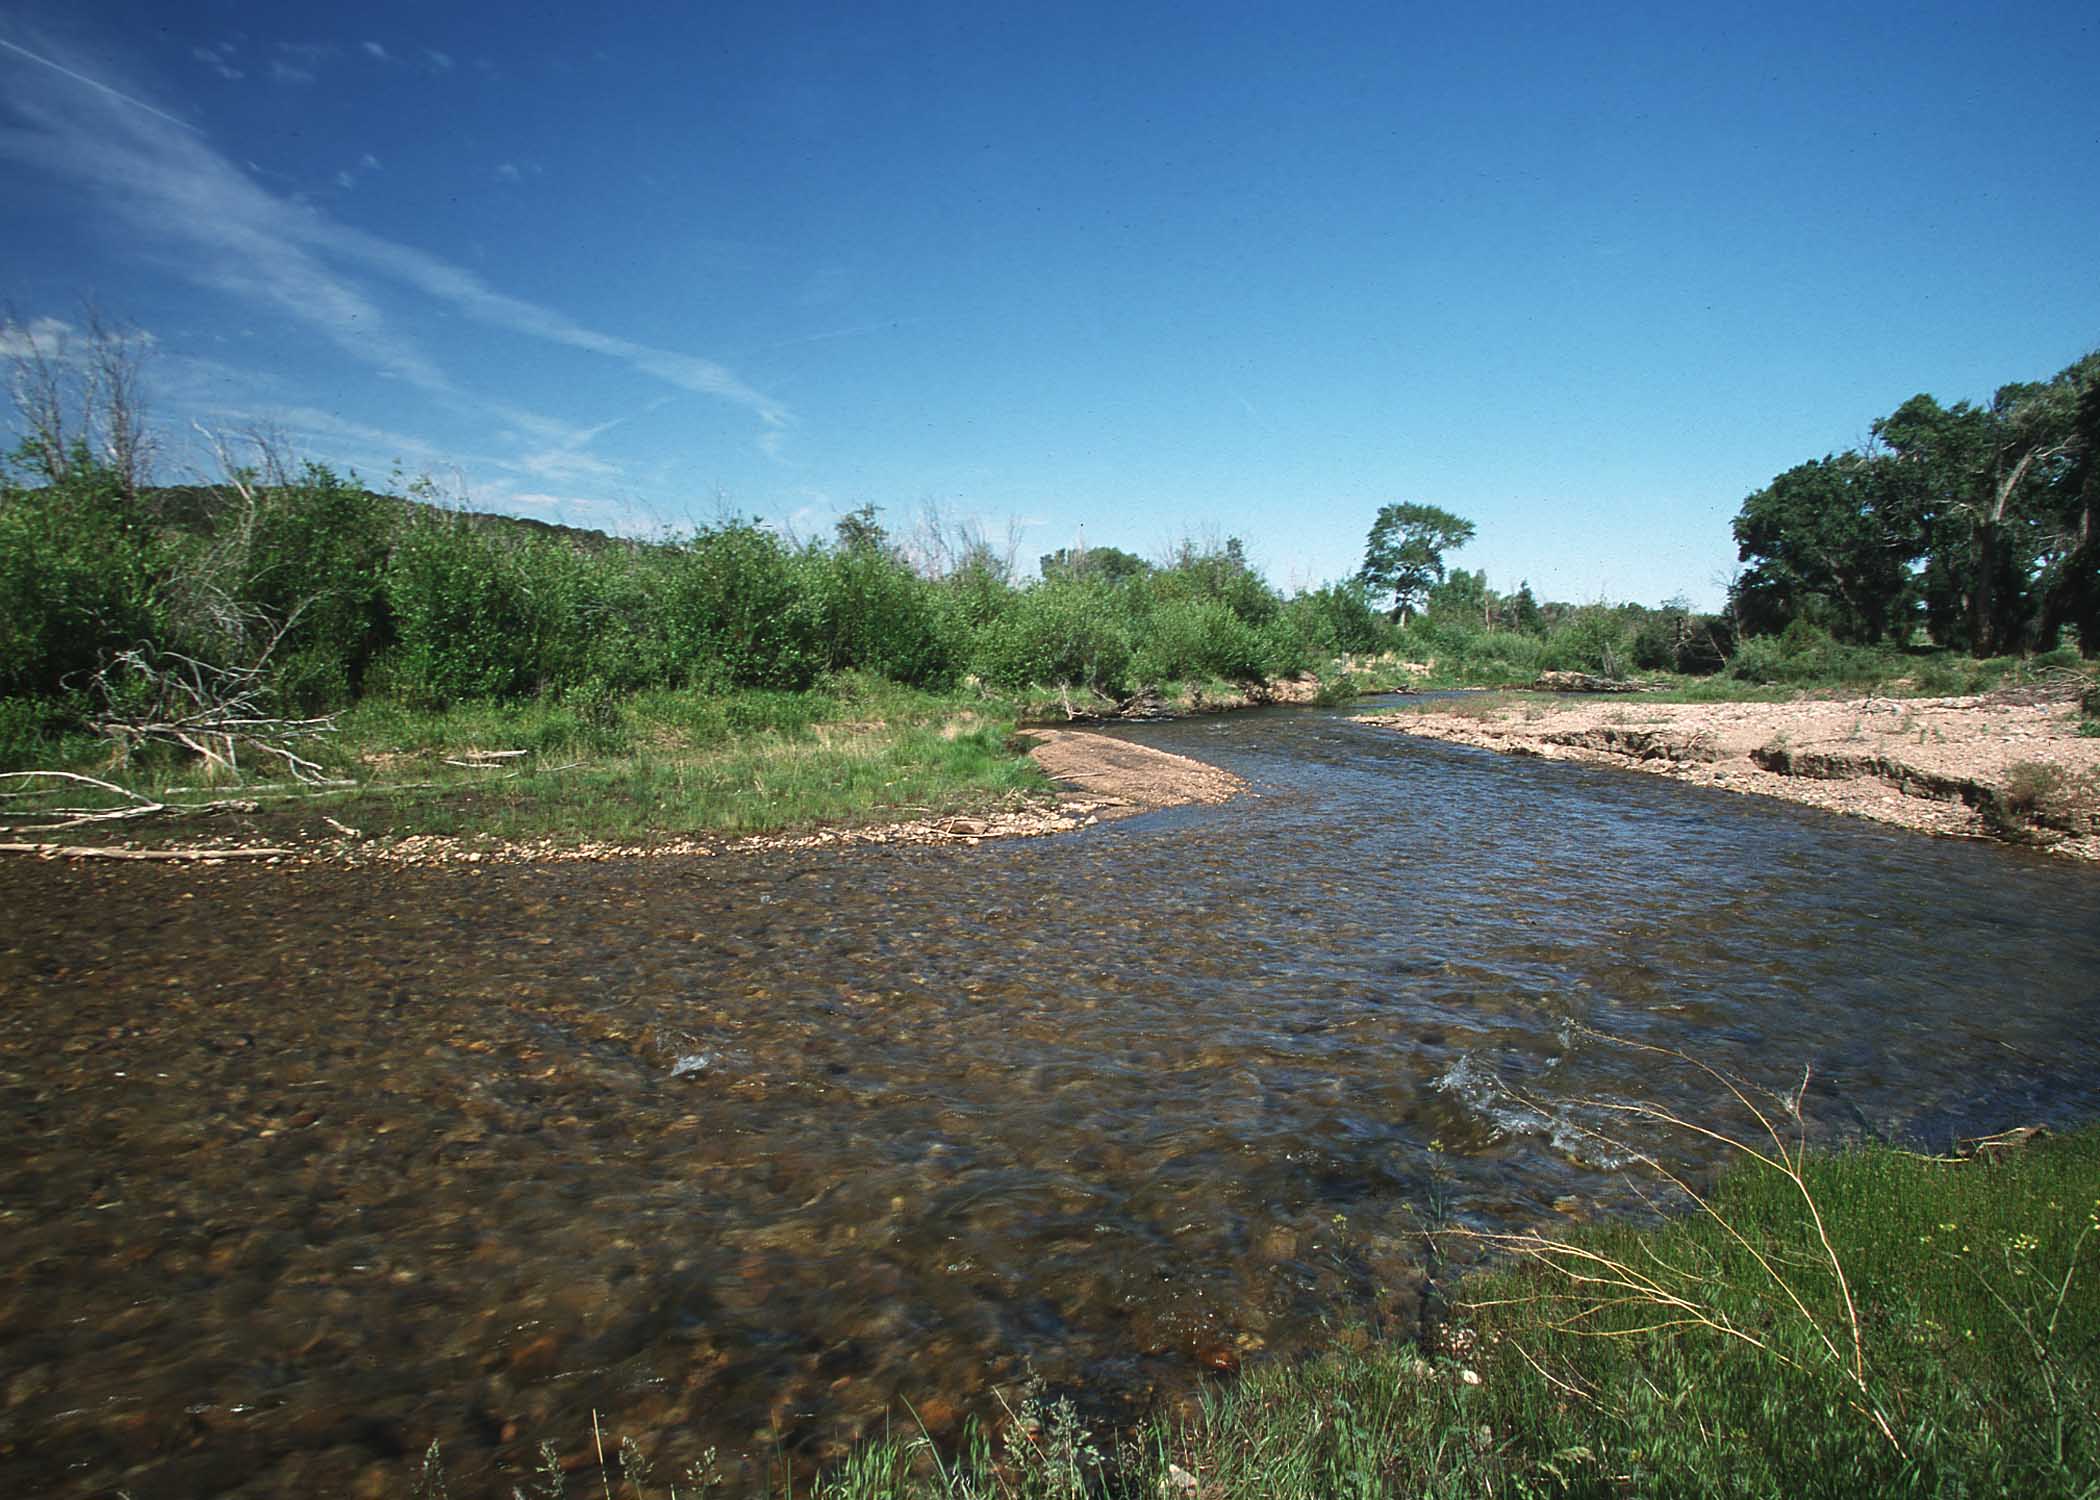 House Aims To Reduce Protections Of The Clean Water Act